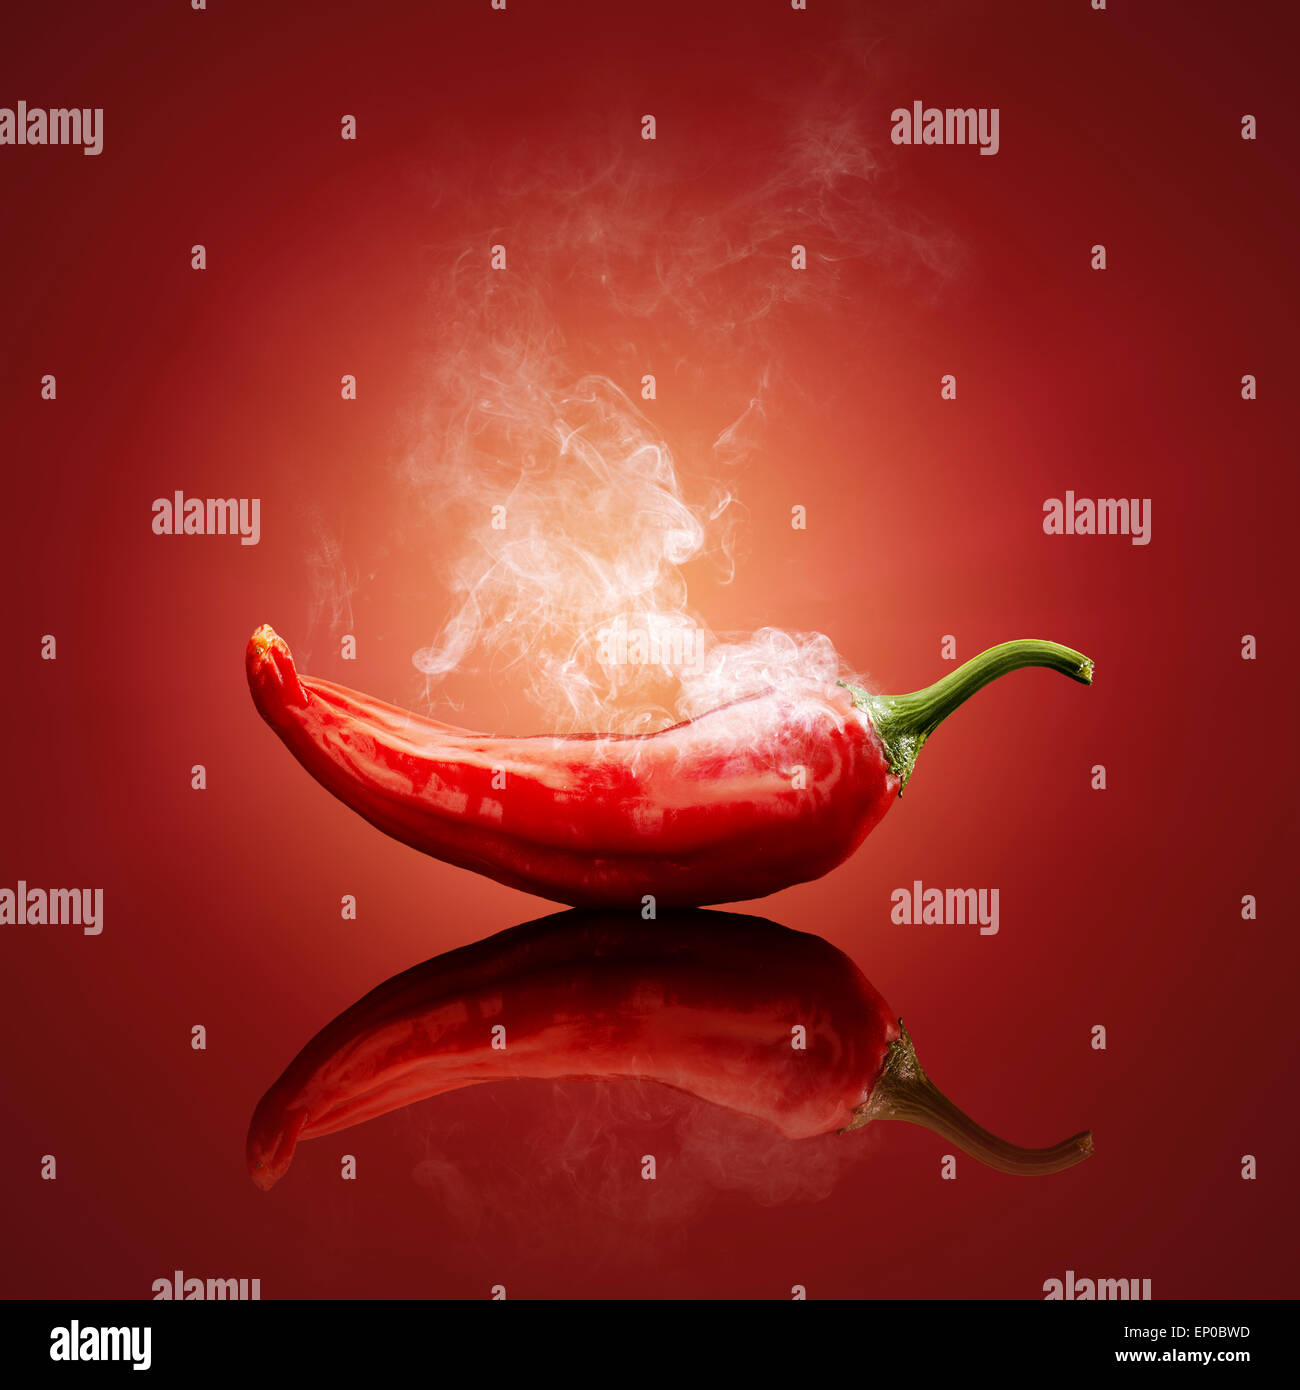 Smoking hot red chilli with reflection Stock Photo